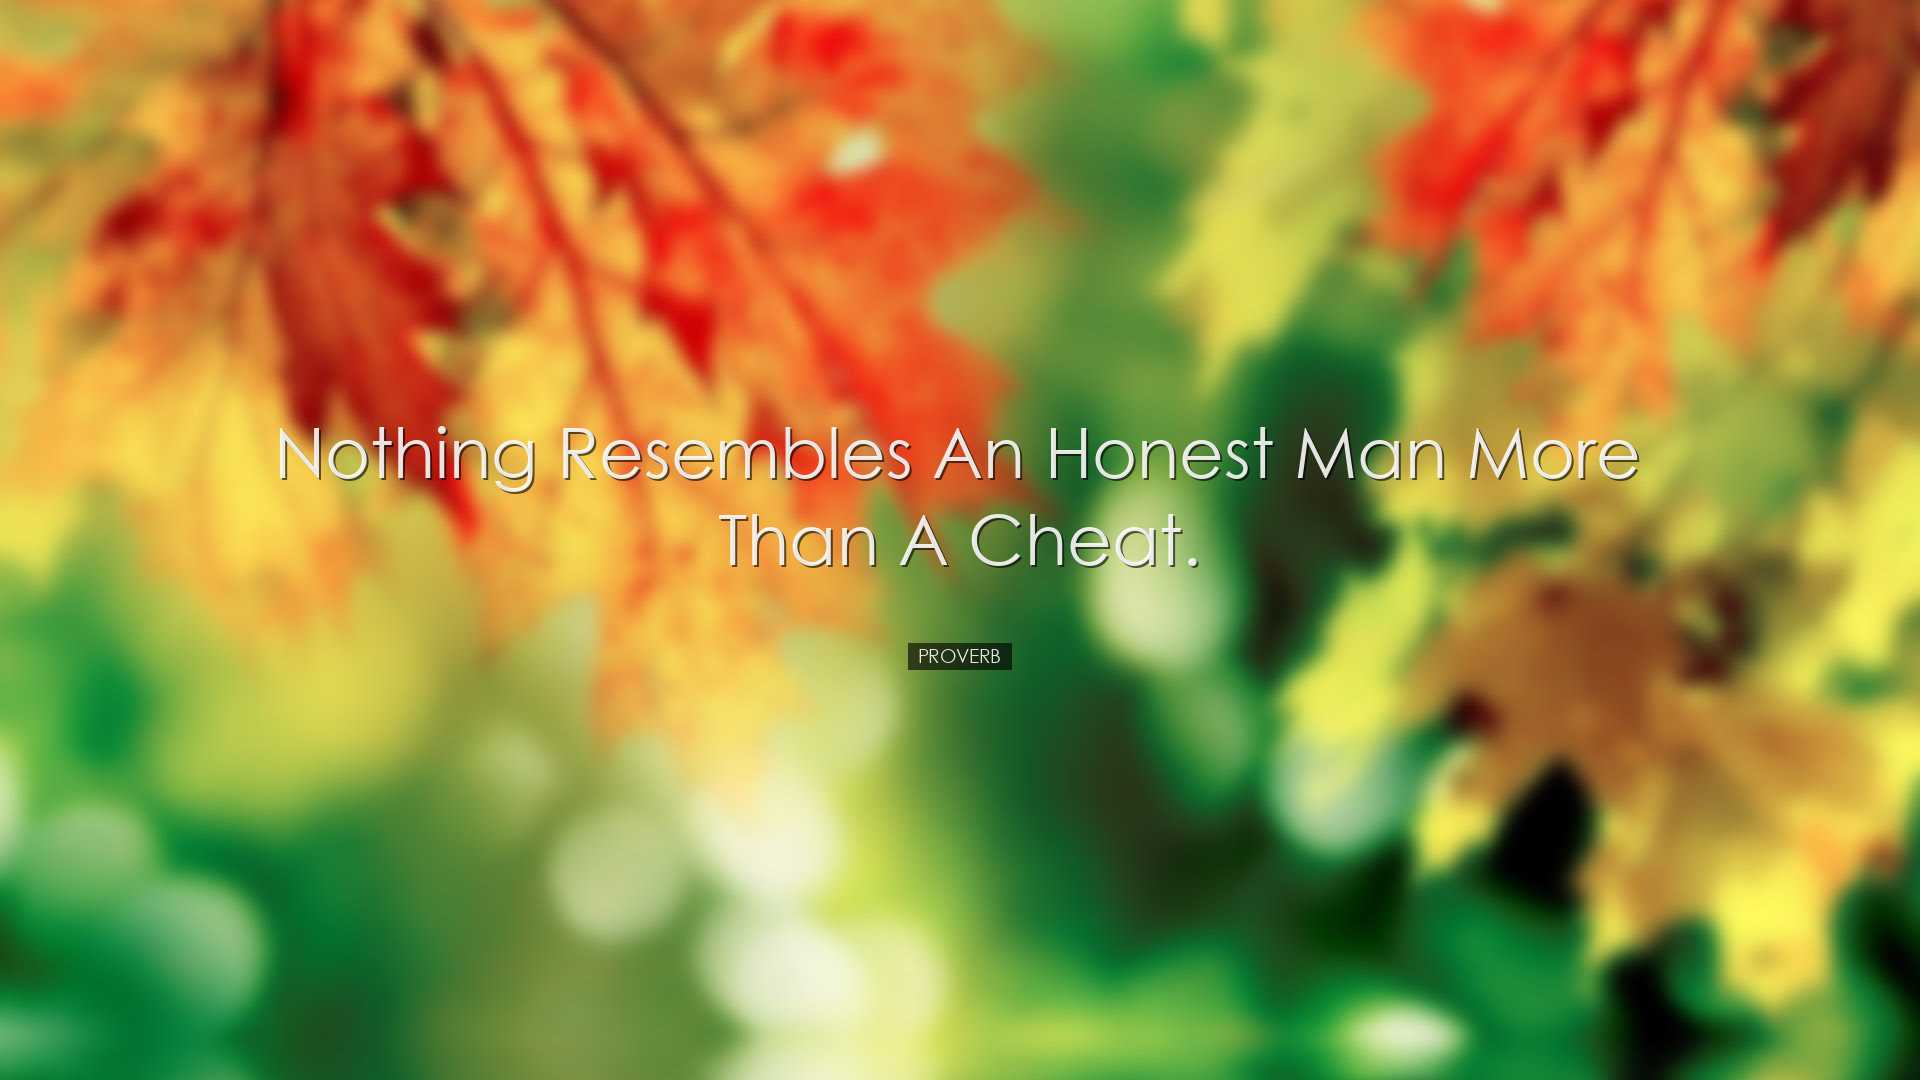 Nothing resembles an honest man more than a cheat. - Proverb